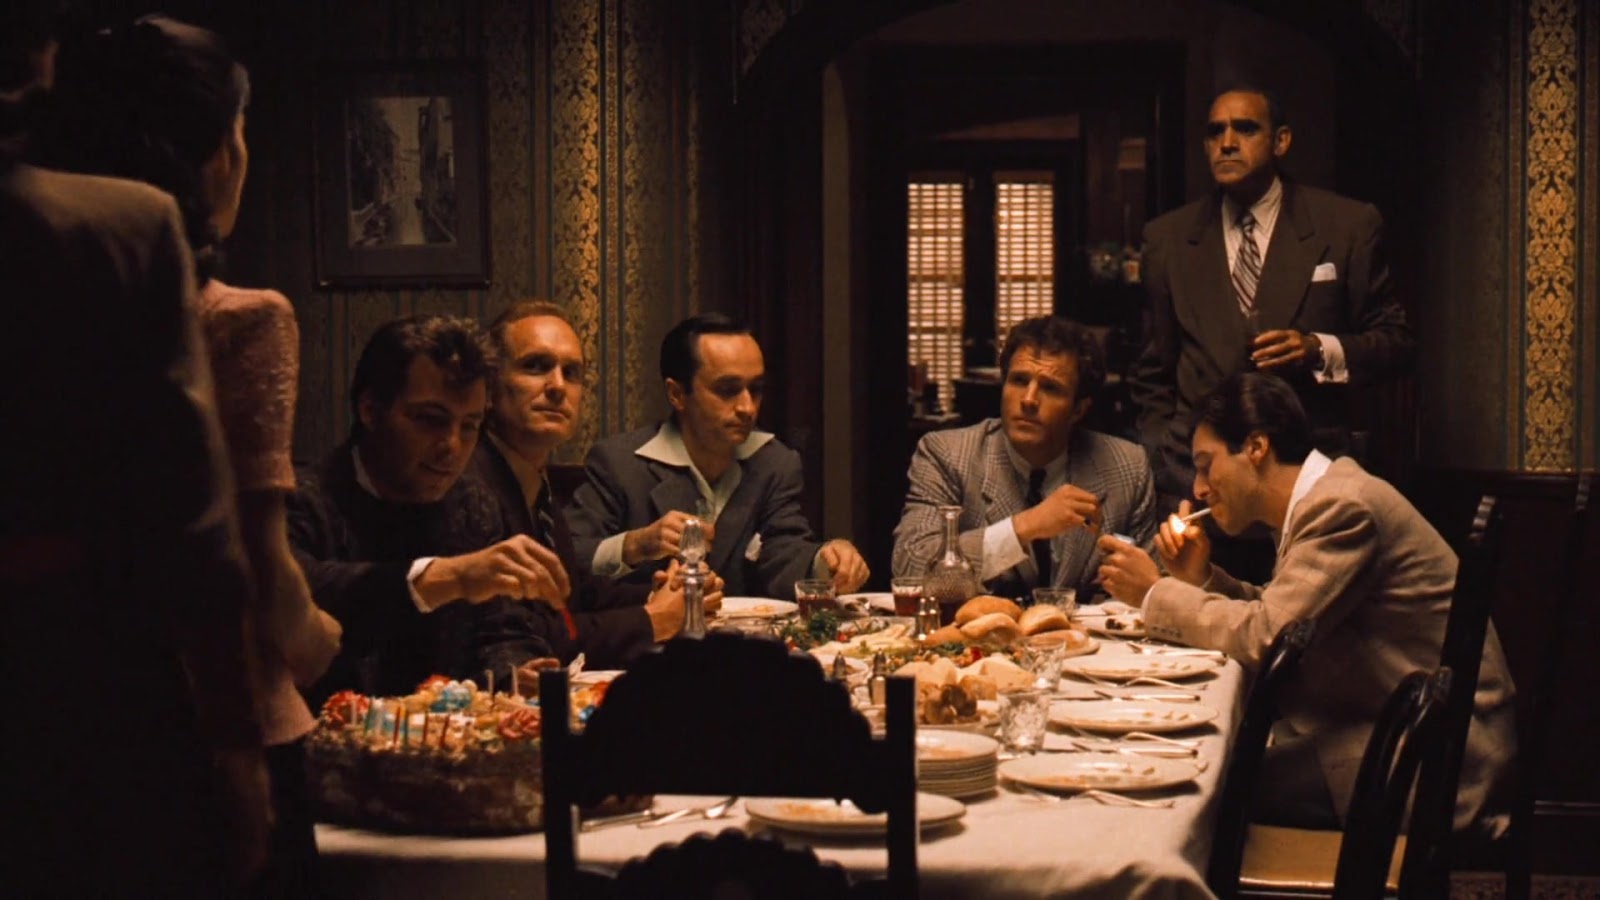 Reunion birthday party from The Godfather Part II